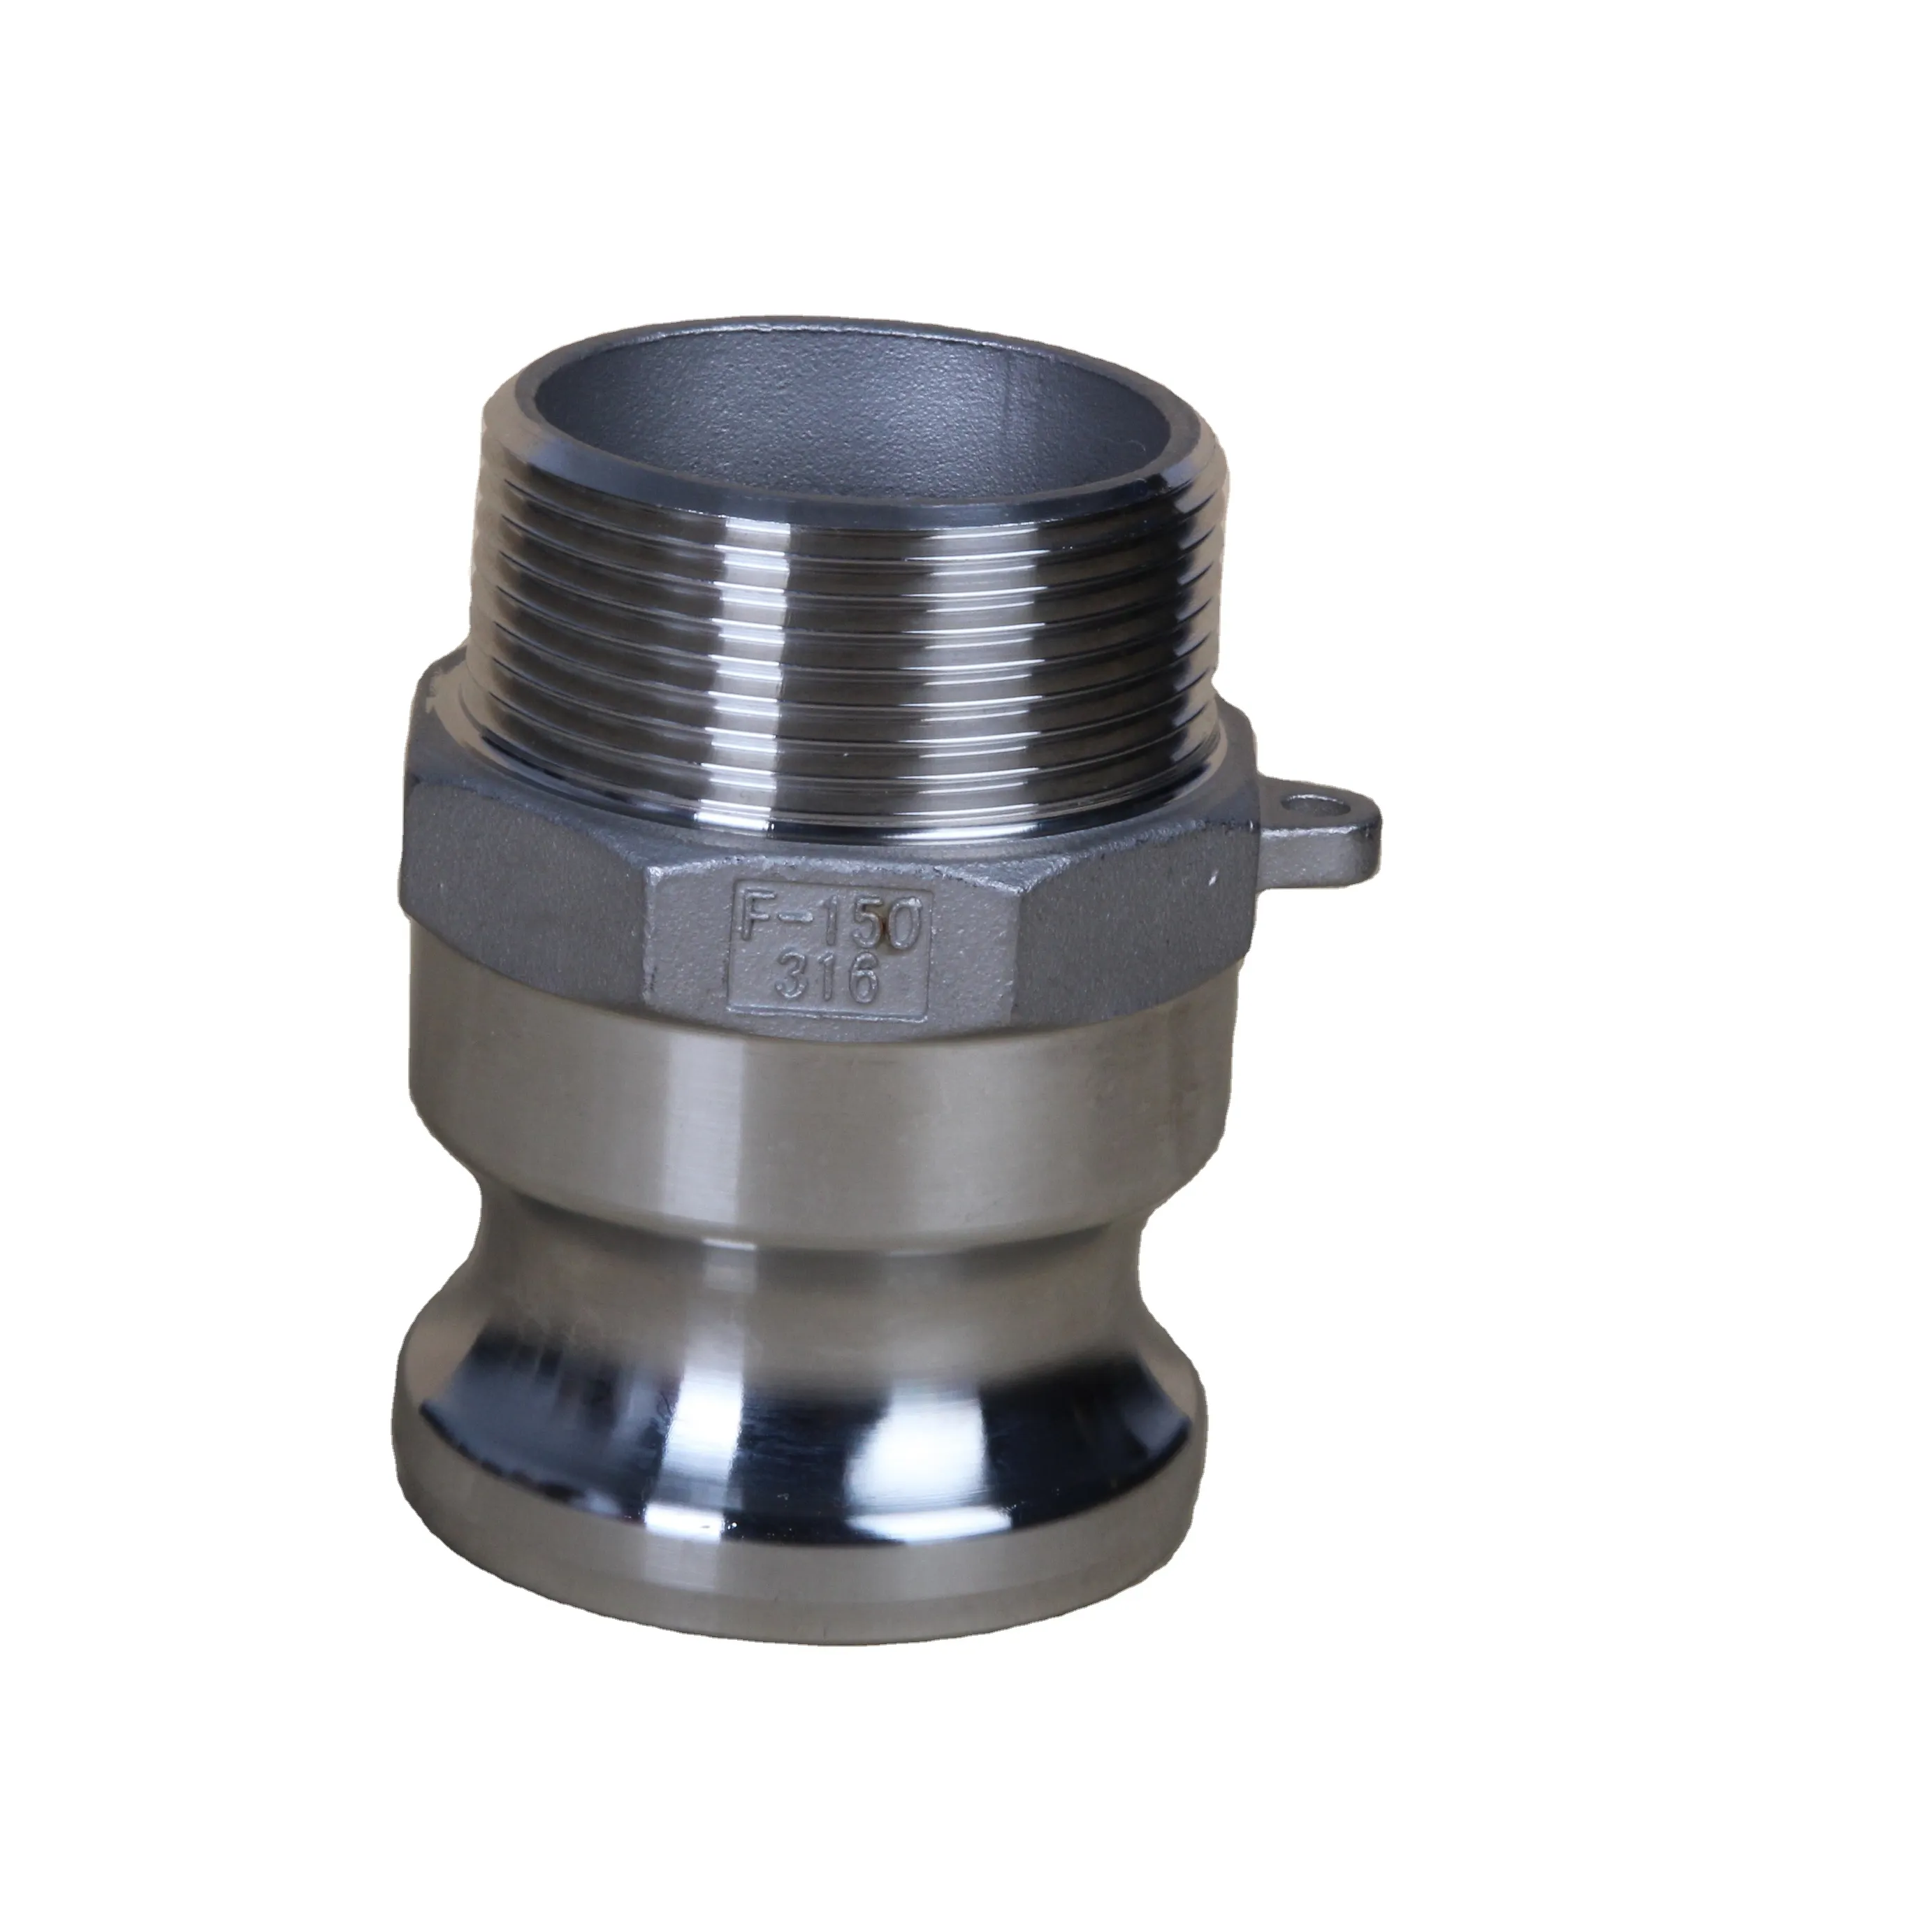 High quality Stainless Steel adapter for 3 inch hose camlock coupling Type F